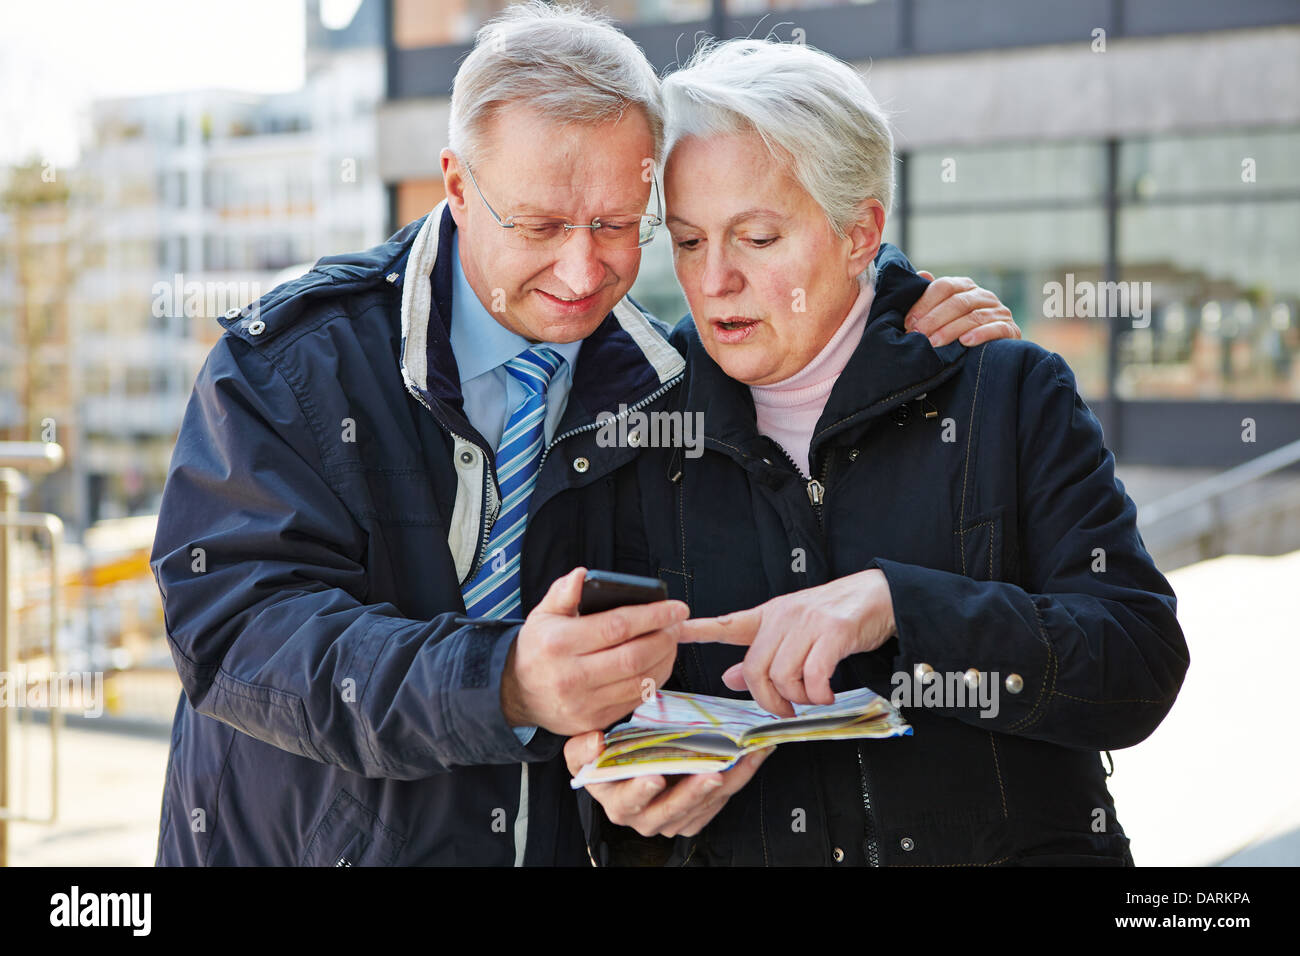 Senior couple as tourists with map and smartphone in a city Stock Photo